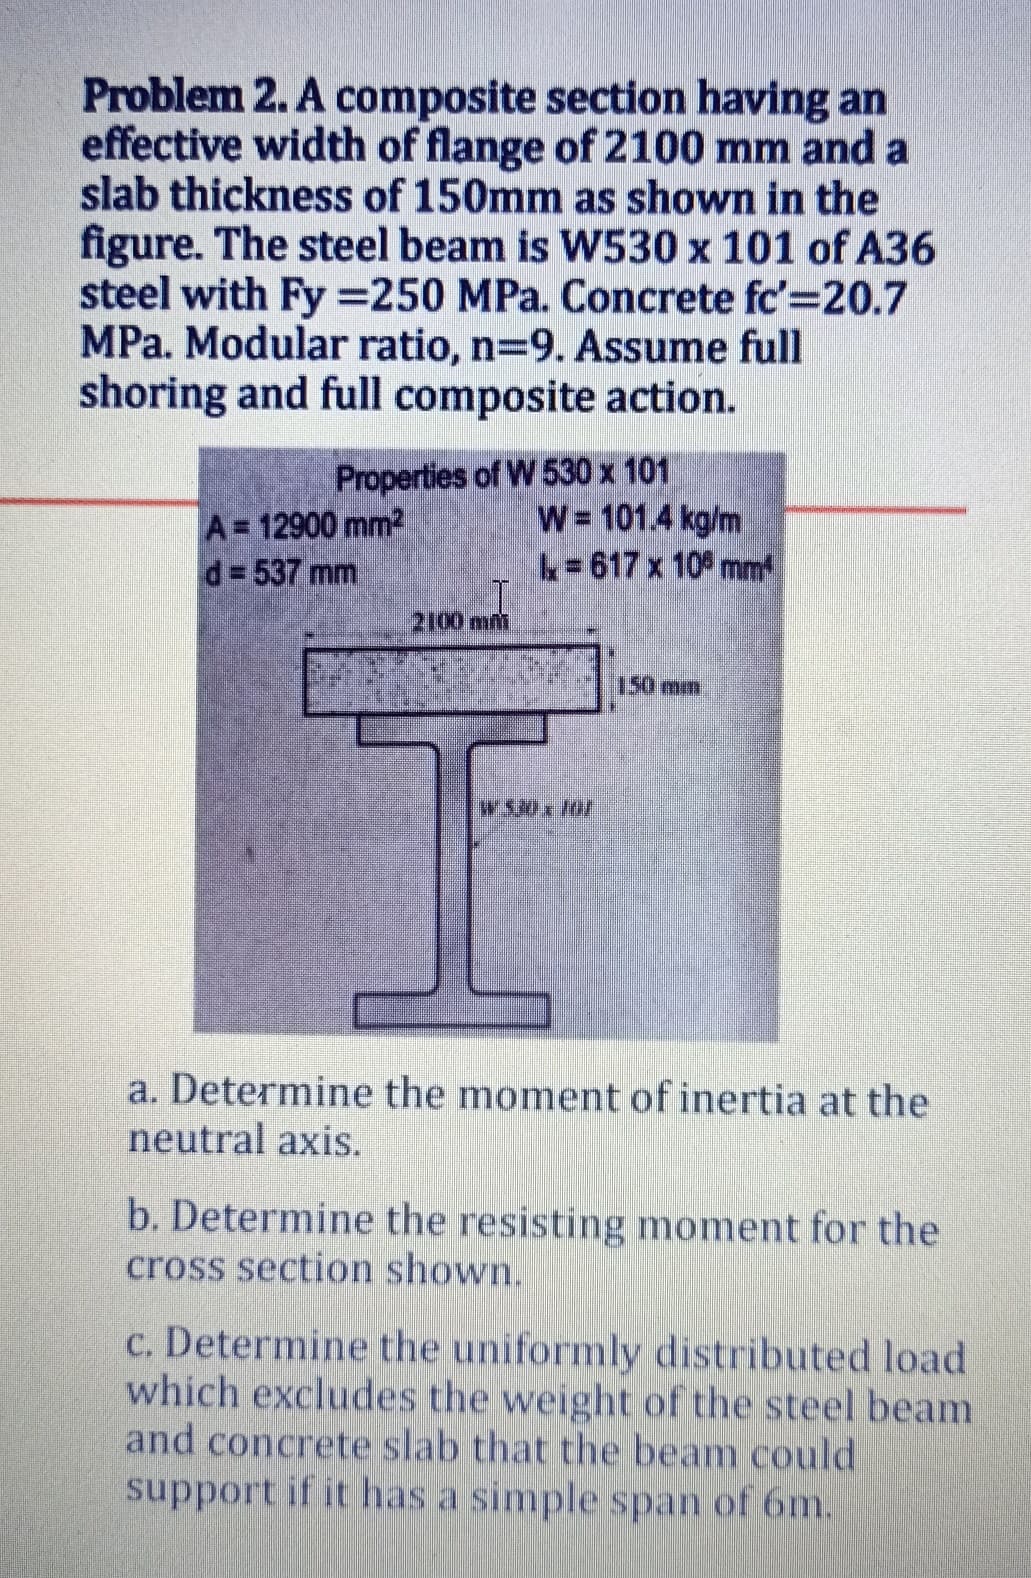 Problem 2. A composite section having an
effective width of flange of 2100 mm and a
slab thickness of 150mm as shown in the
figure. The steel beam is WS30 x 101 of A36
steel with Fy =250 MPa. Concrete fc'=20.7
MPa. Modular ratio, n=9. Assume full
shoring and full composite action.
A 12900 mm2
d= 537 mm
Properties of W 530 x 101
W= 101.4 kg/m
k=617 x 10 mm
2100mm
150mm
W530x10/
a. Determine the moment of inertia at the
neutral axis.
b. Determine the resisting moment for the
cross section shown.
c. Determine the uniformly distributed load
which excludes the weight of the steel beam
and concrete slab that the beam could
support if ithas a simplespan of 6m.
